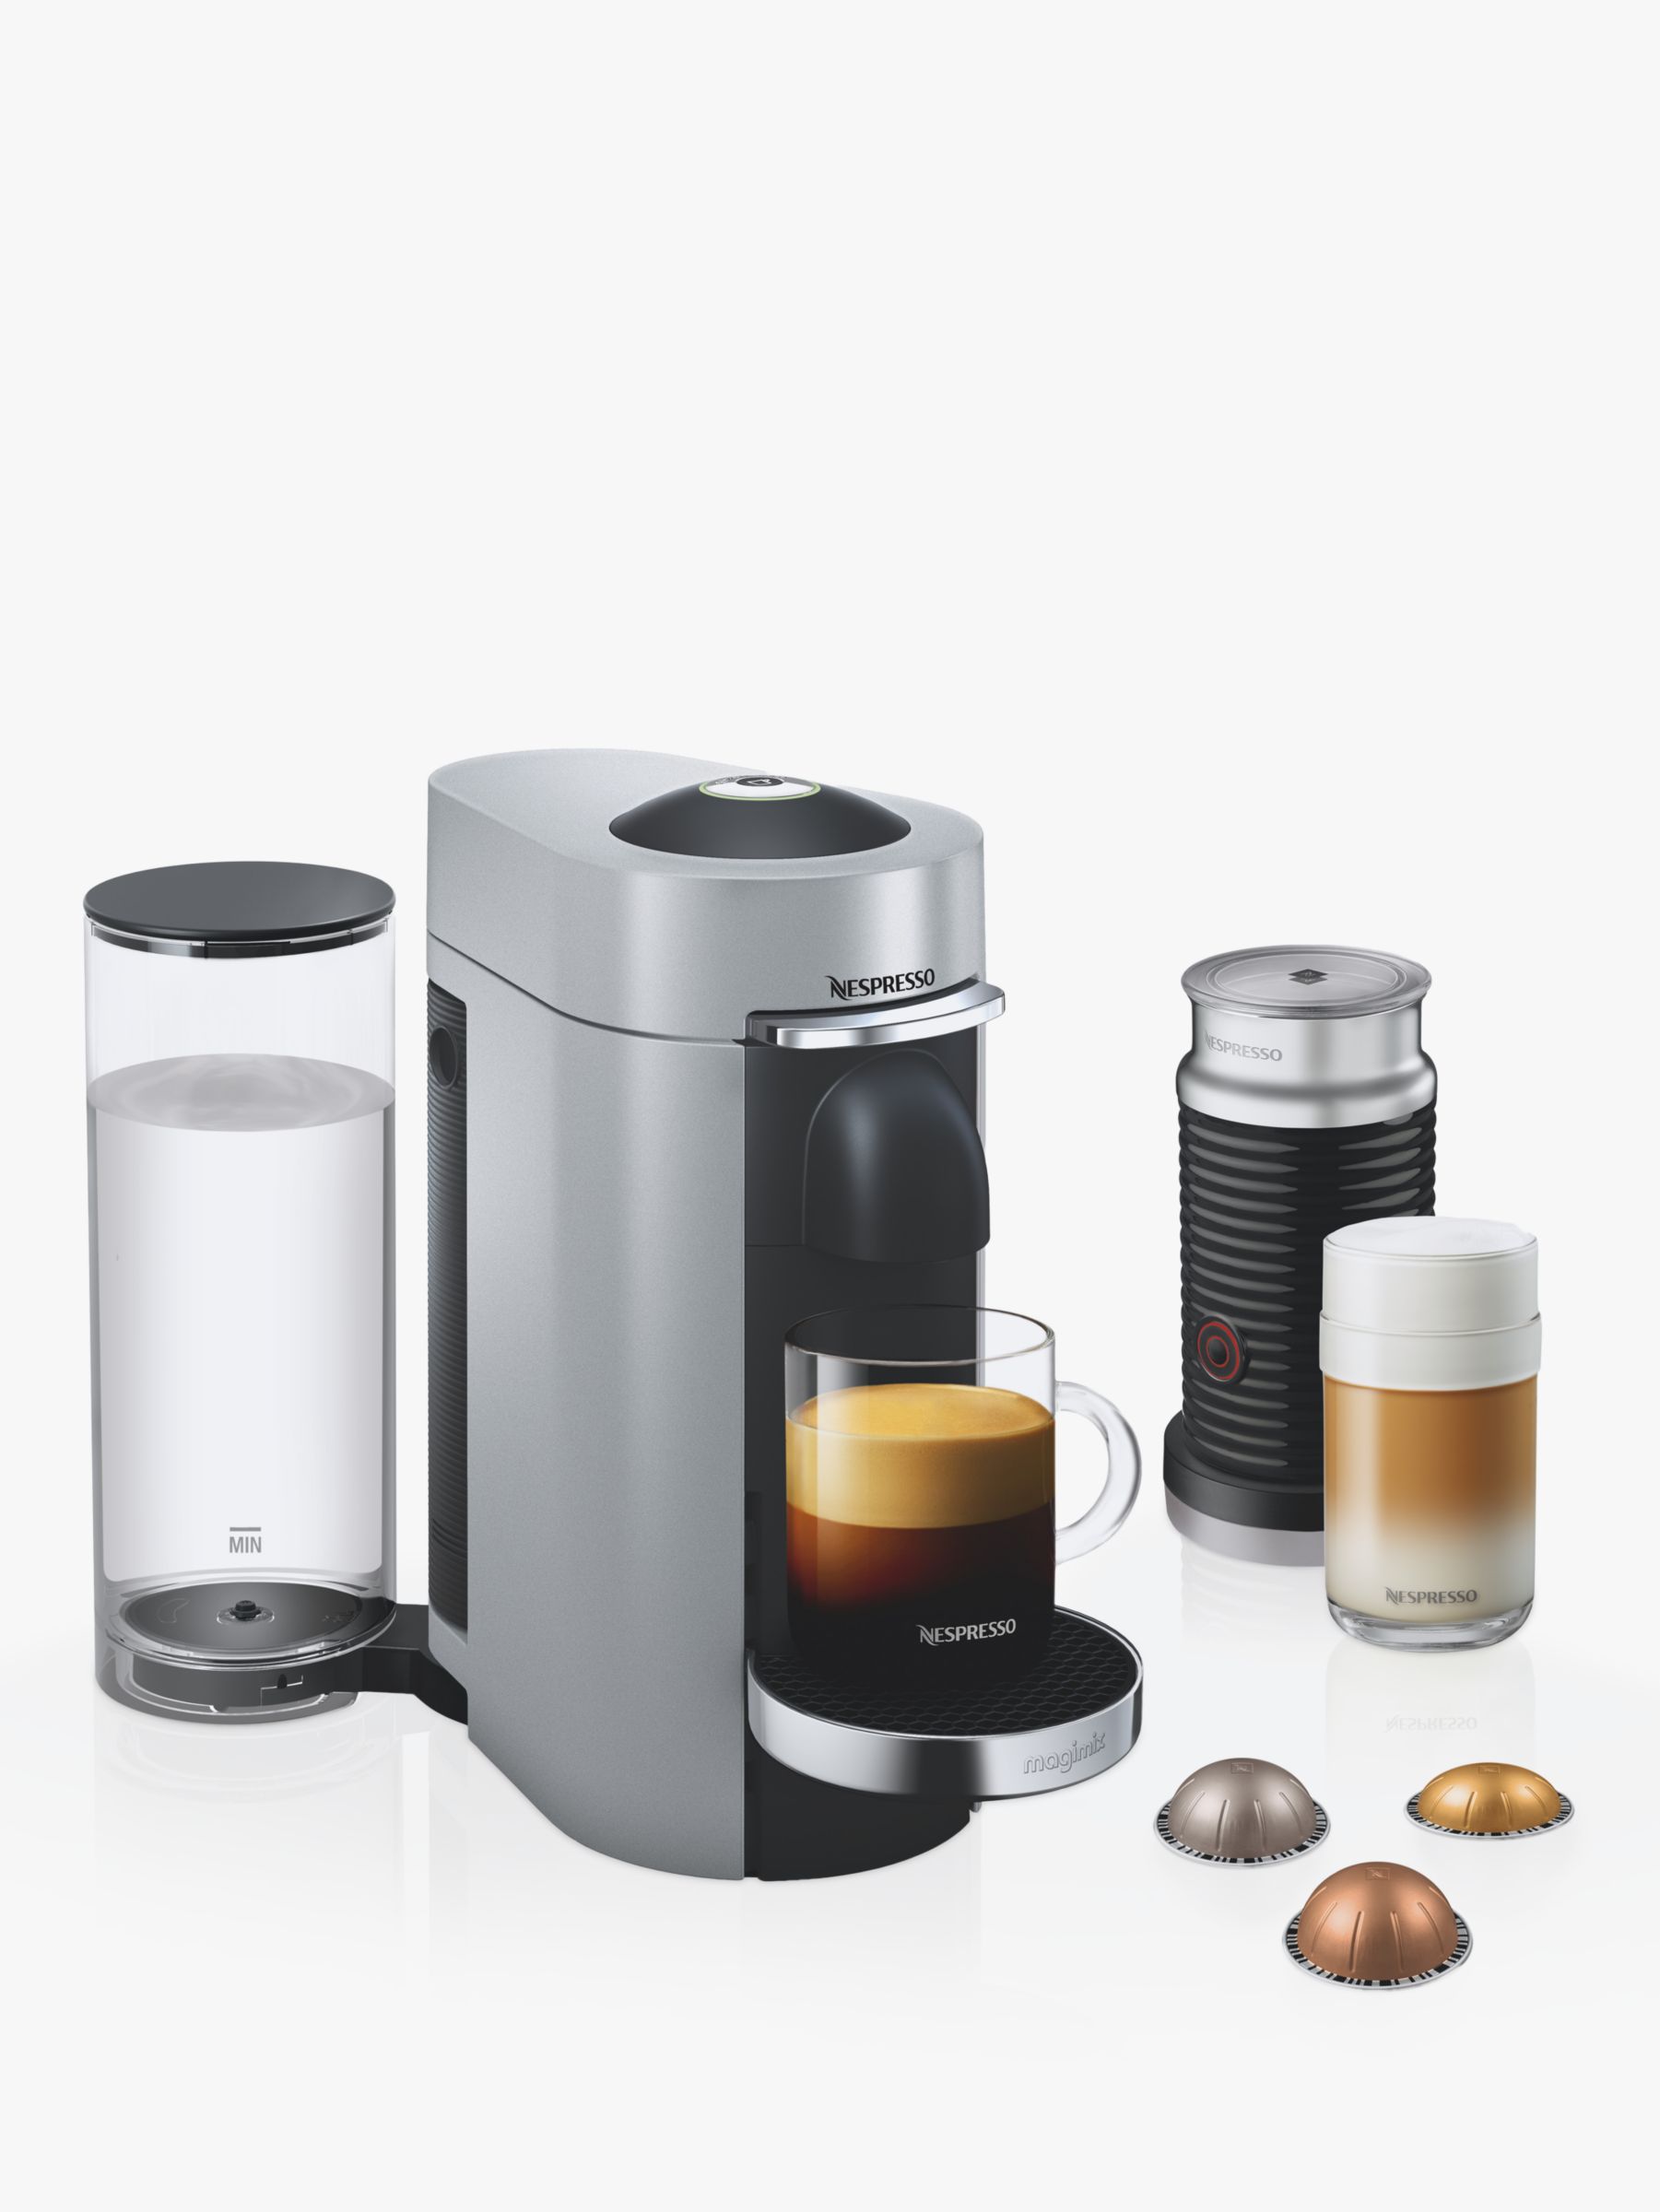 Plus Coffee Machine with Aeroccino by